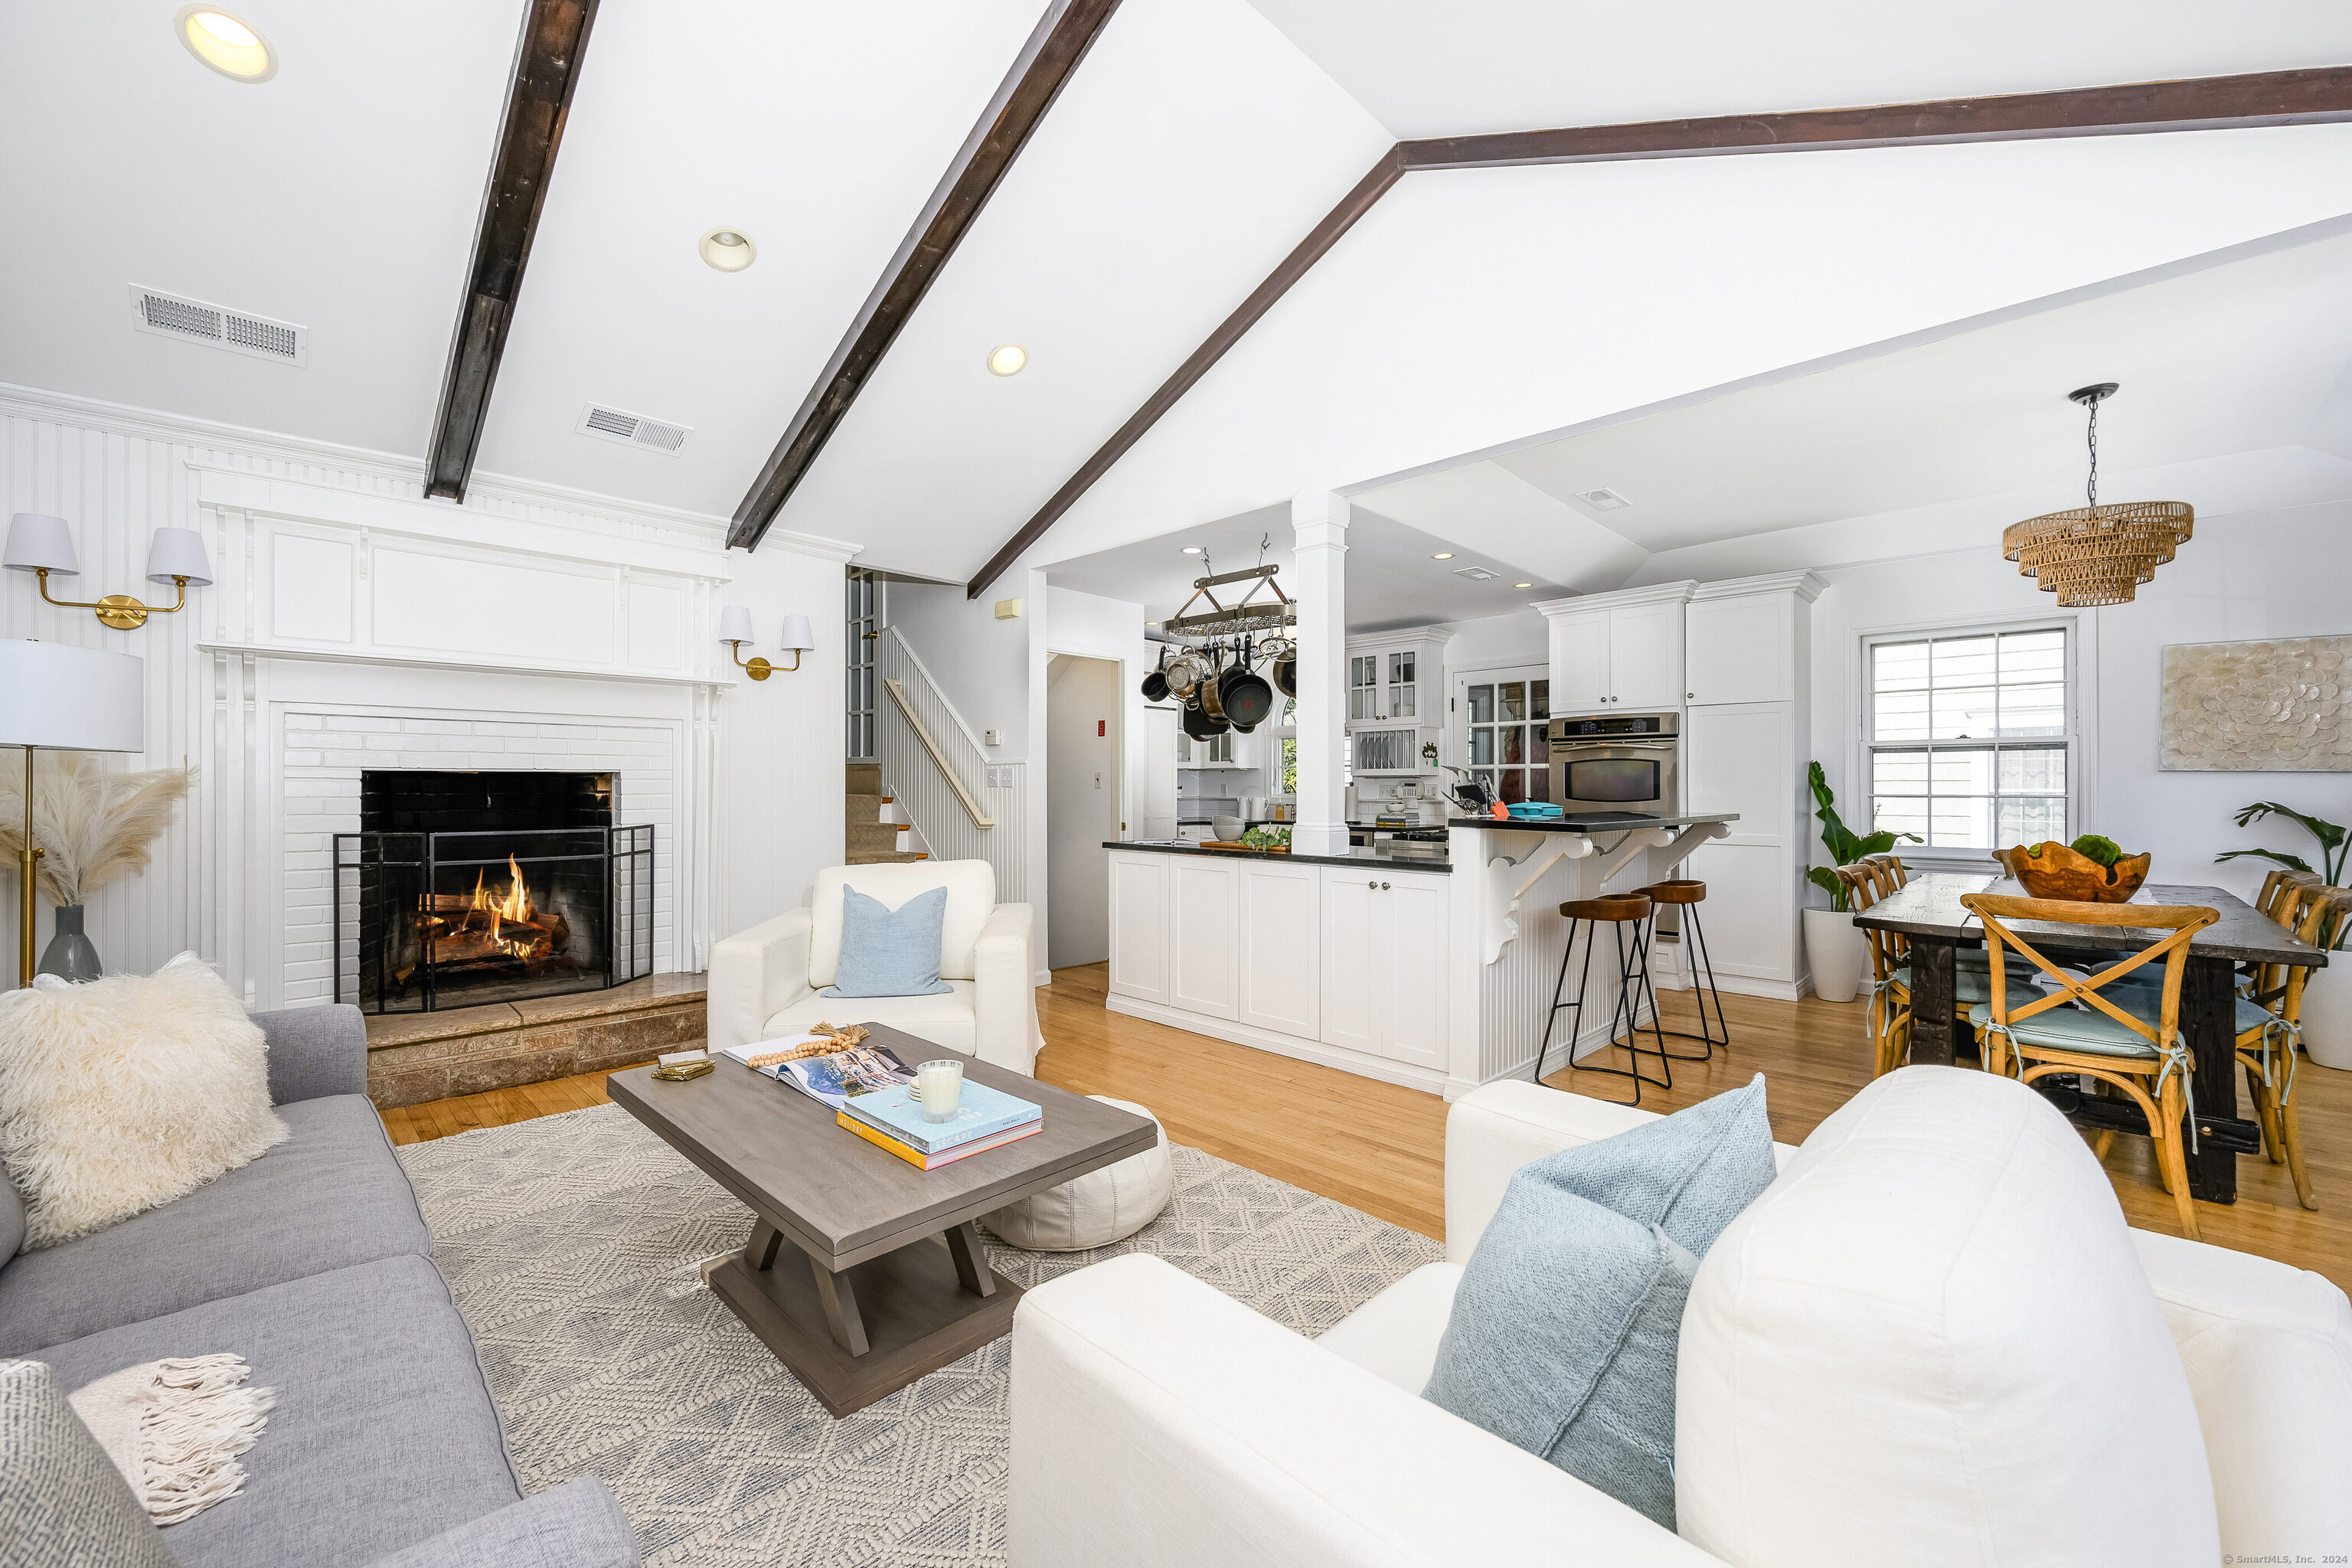 Property for Sale at 31 Dickinson Road, Darien, Connecticut - Bedrooms: 4 
Bathrooms: 2 
Rooms: 8  - $1,295,000